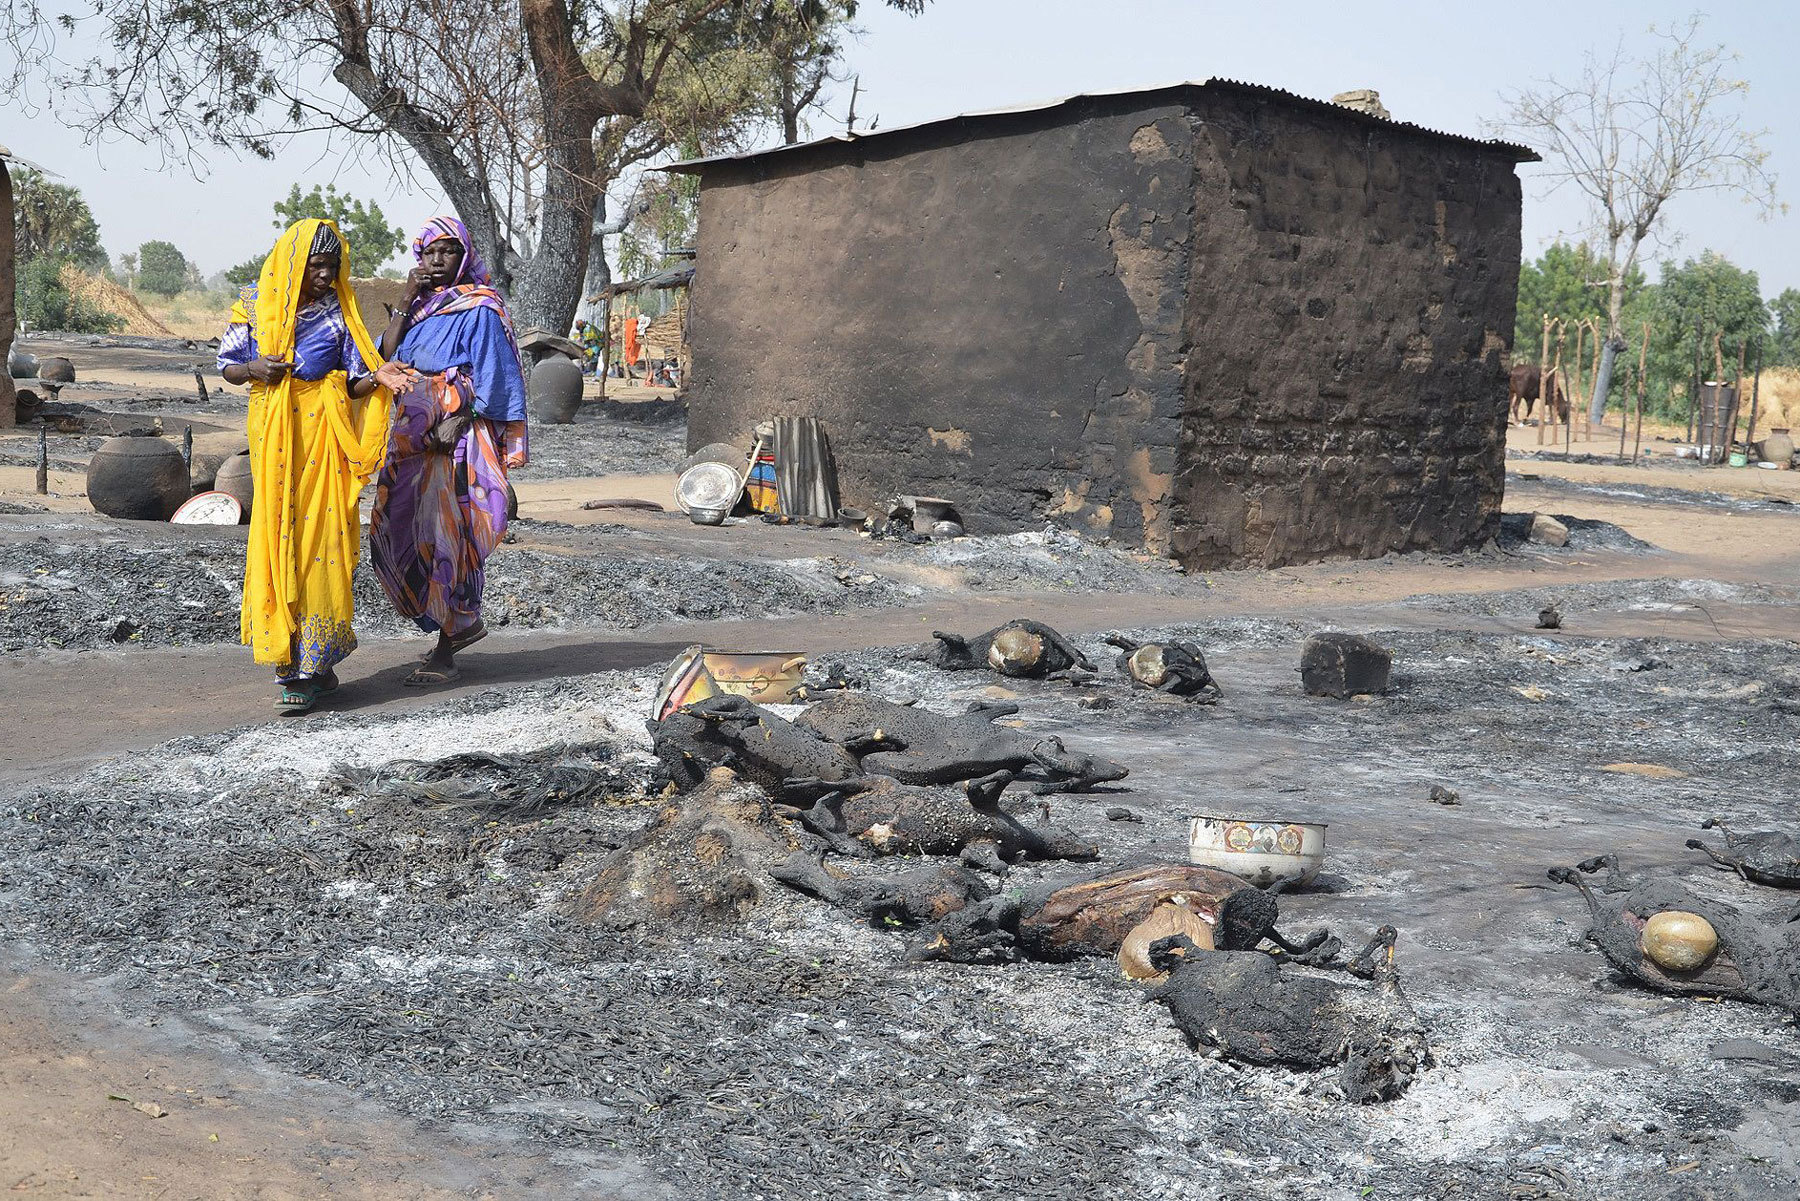 Young girls fleeing Boko Haram walk past livestock burned by the militants on Feb. 6 in Mairi village, near Maiduguri. (AFP/Getty Images)